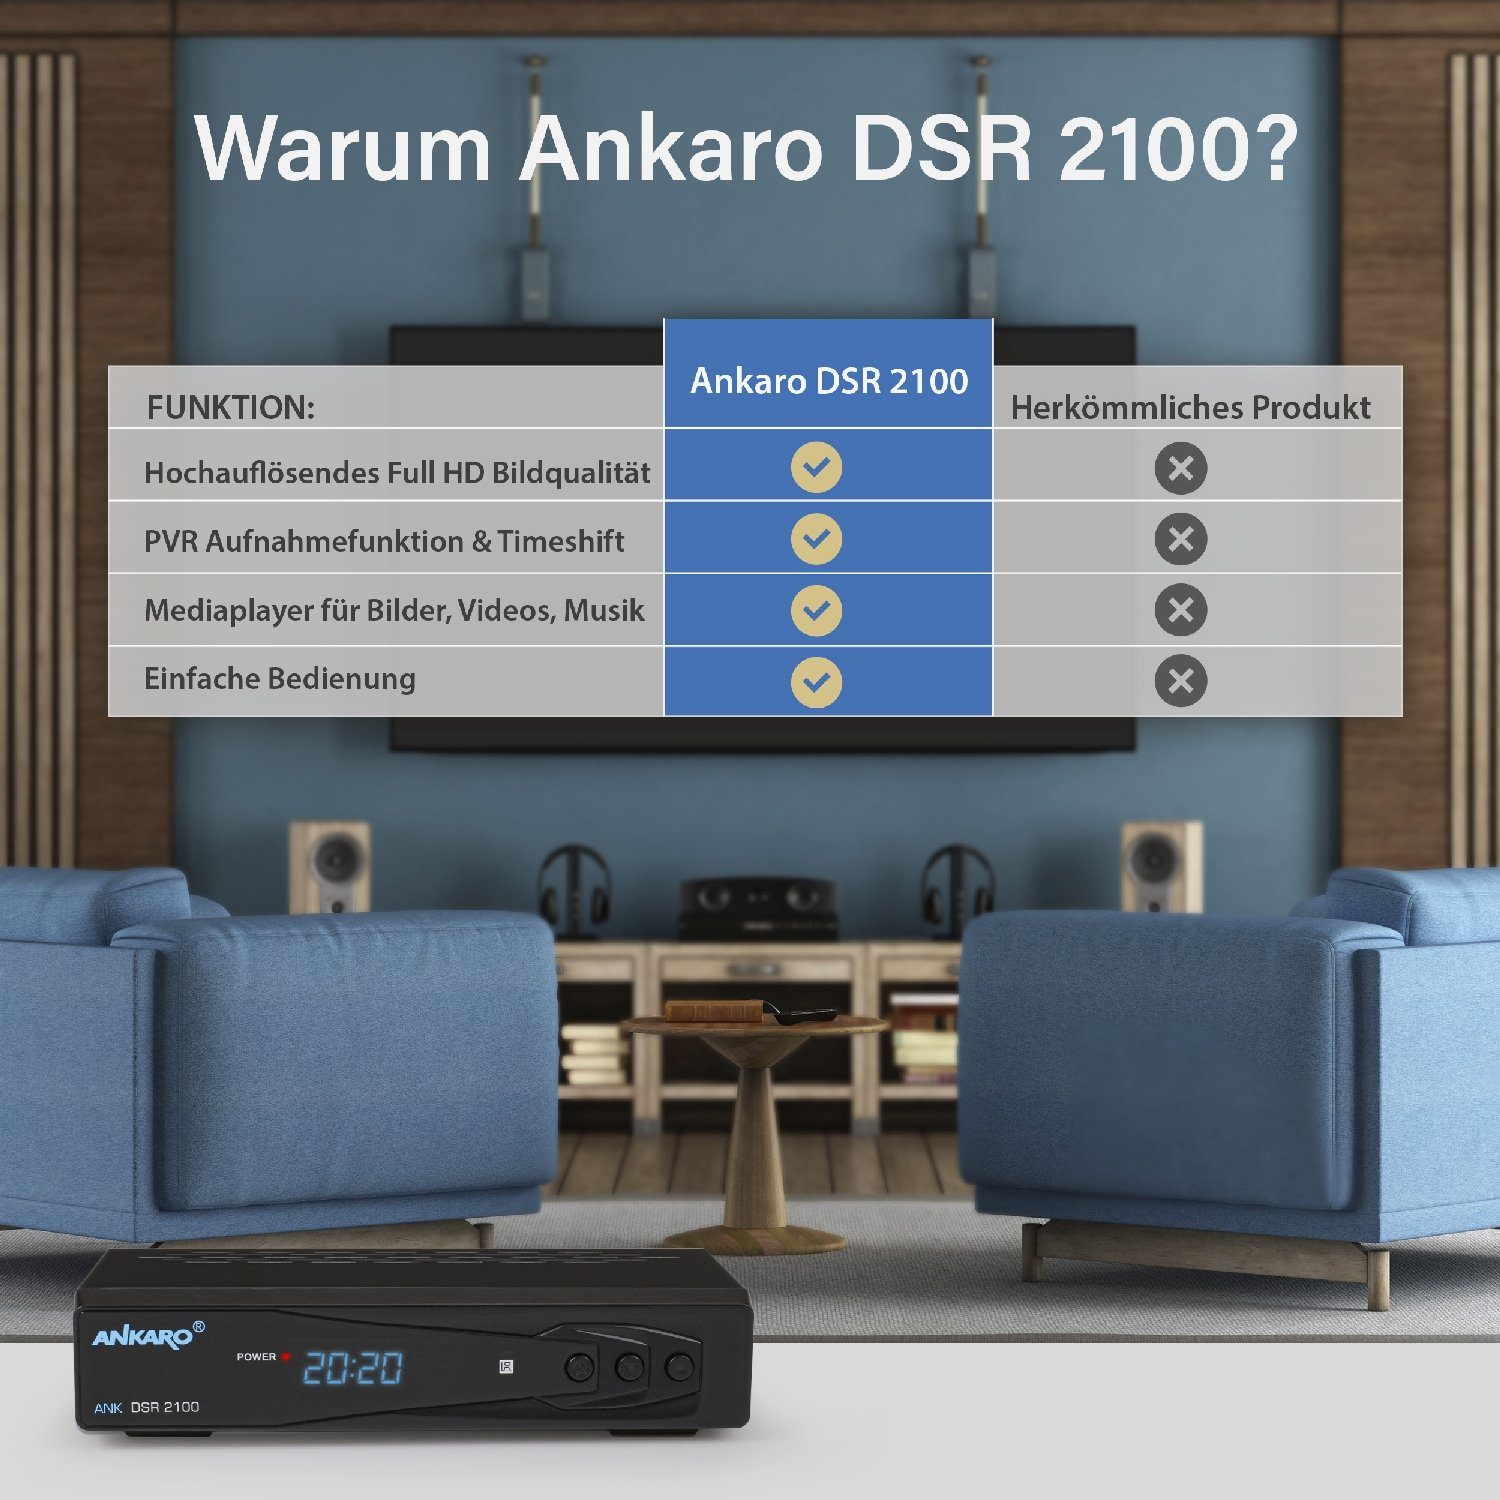 Ankaro 2100 DSR HDMI - + USB, Aufnahmefunktion mit Unicable SAT-Receiver & SCART, Timeshift (PVR, HDMI, tauglich) Coaxial Kabel